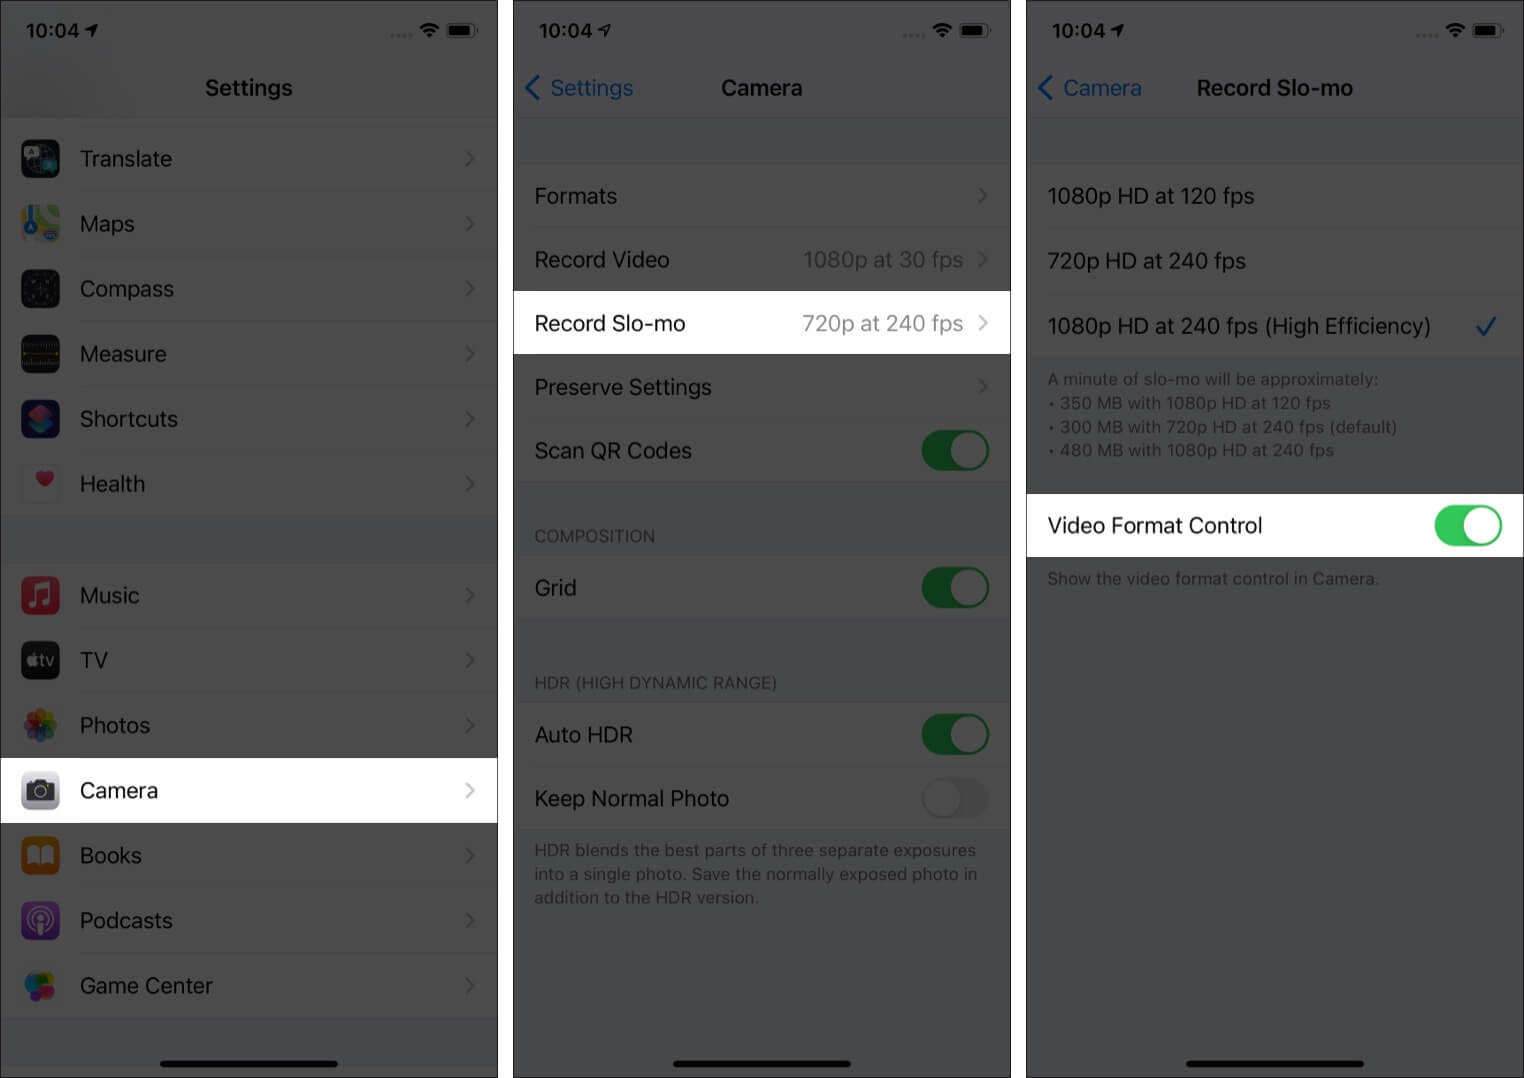 Open Settings Tap on Camera Record Slo-mo and Enable Video Format Control